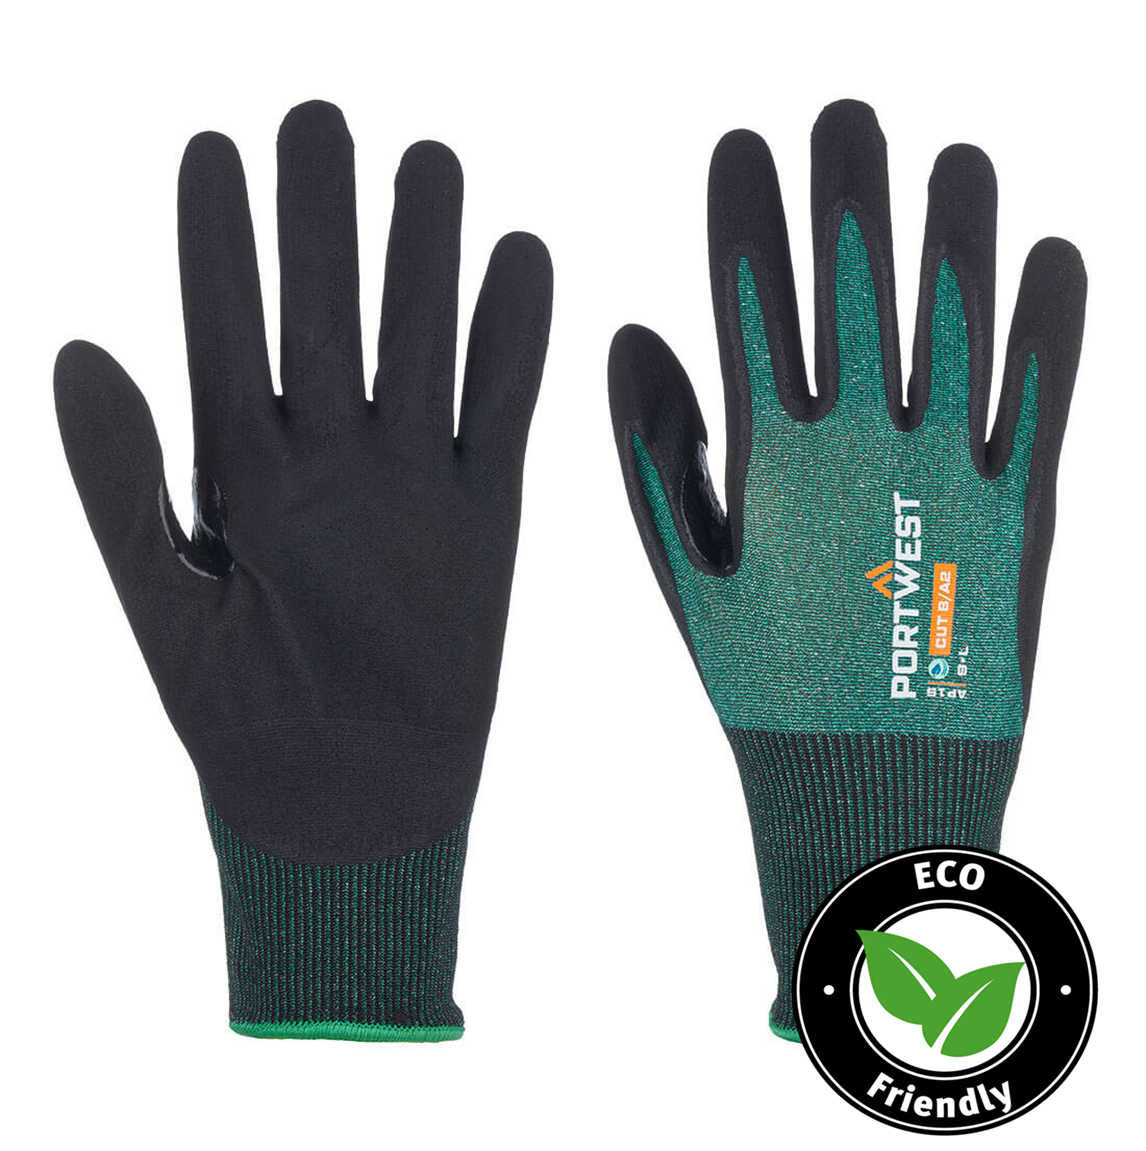 Portwest® Planet AP15-SG LR18 Micro Foam Nitrile Coated 18-gauge Cut Level A2 Work Gloves with Touchscreen Function are constructed from recycled P.E.T. These touchscreen compatible cut level gloves are breathable and produces a low carbon footprint.